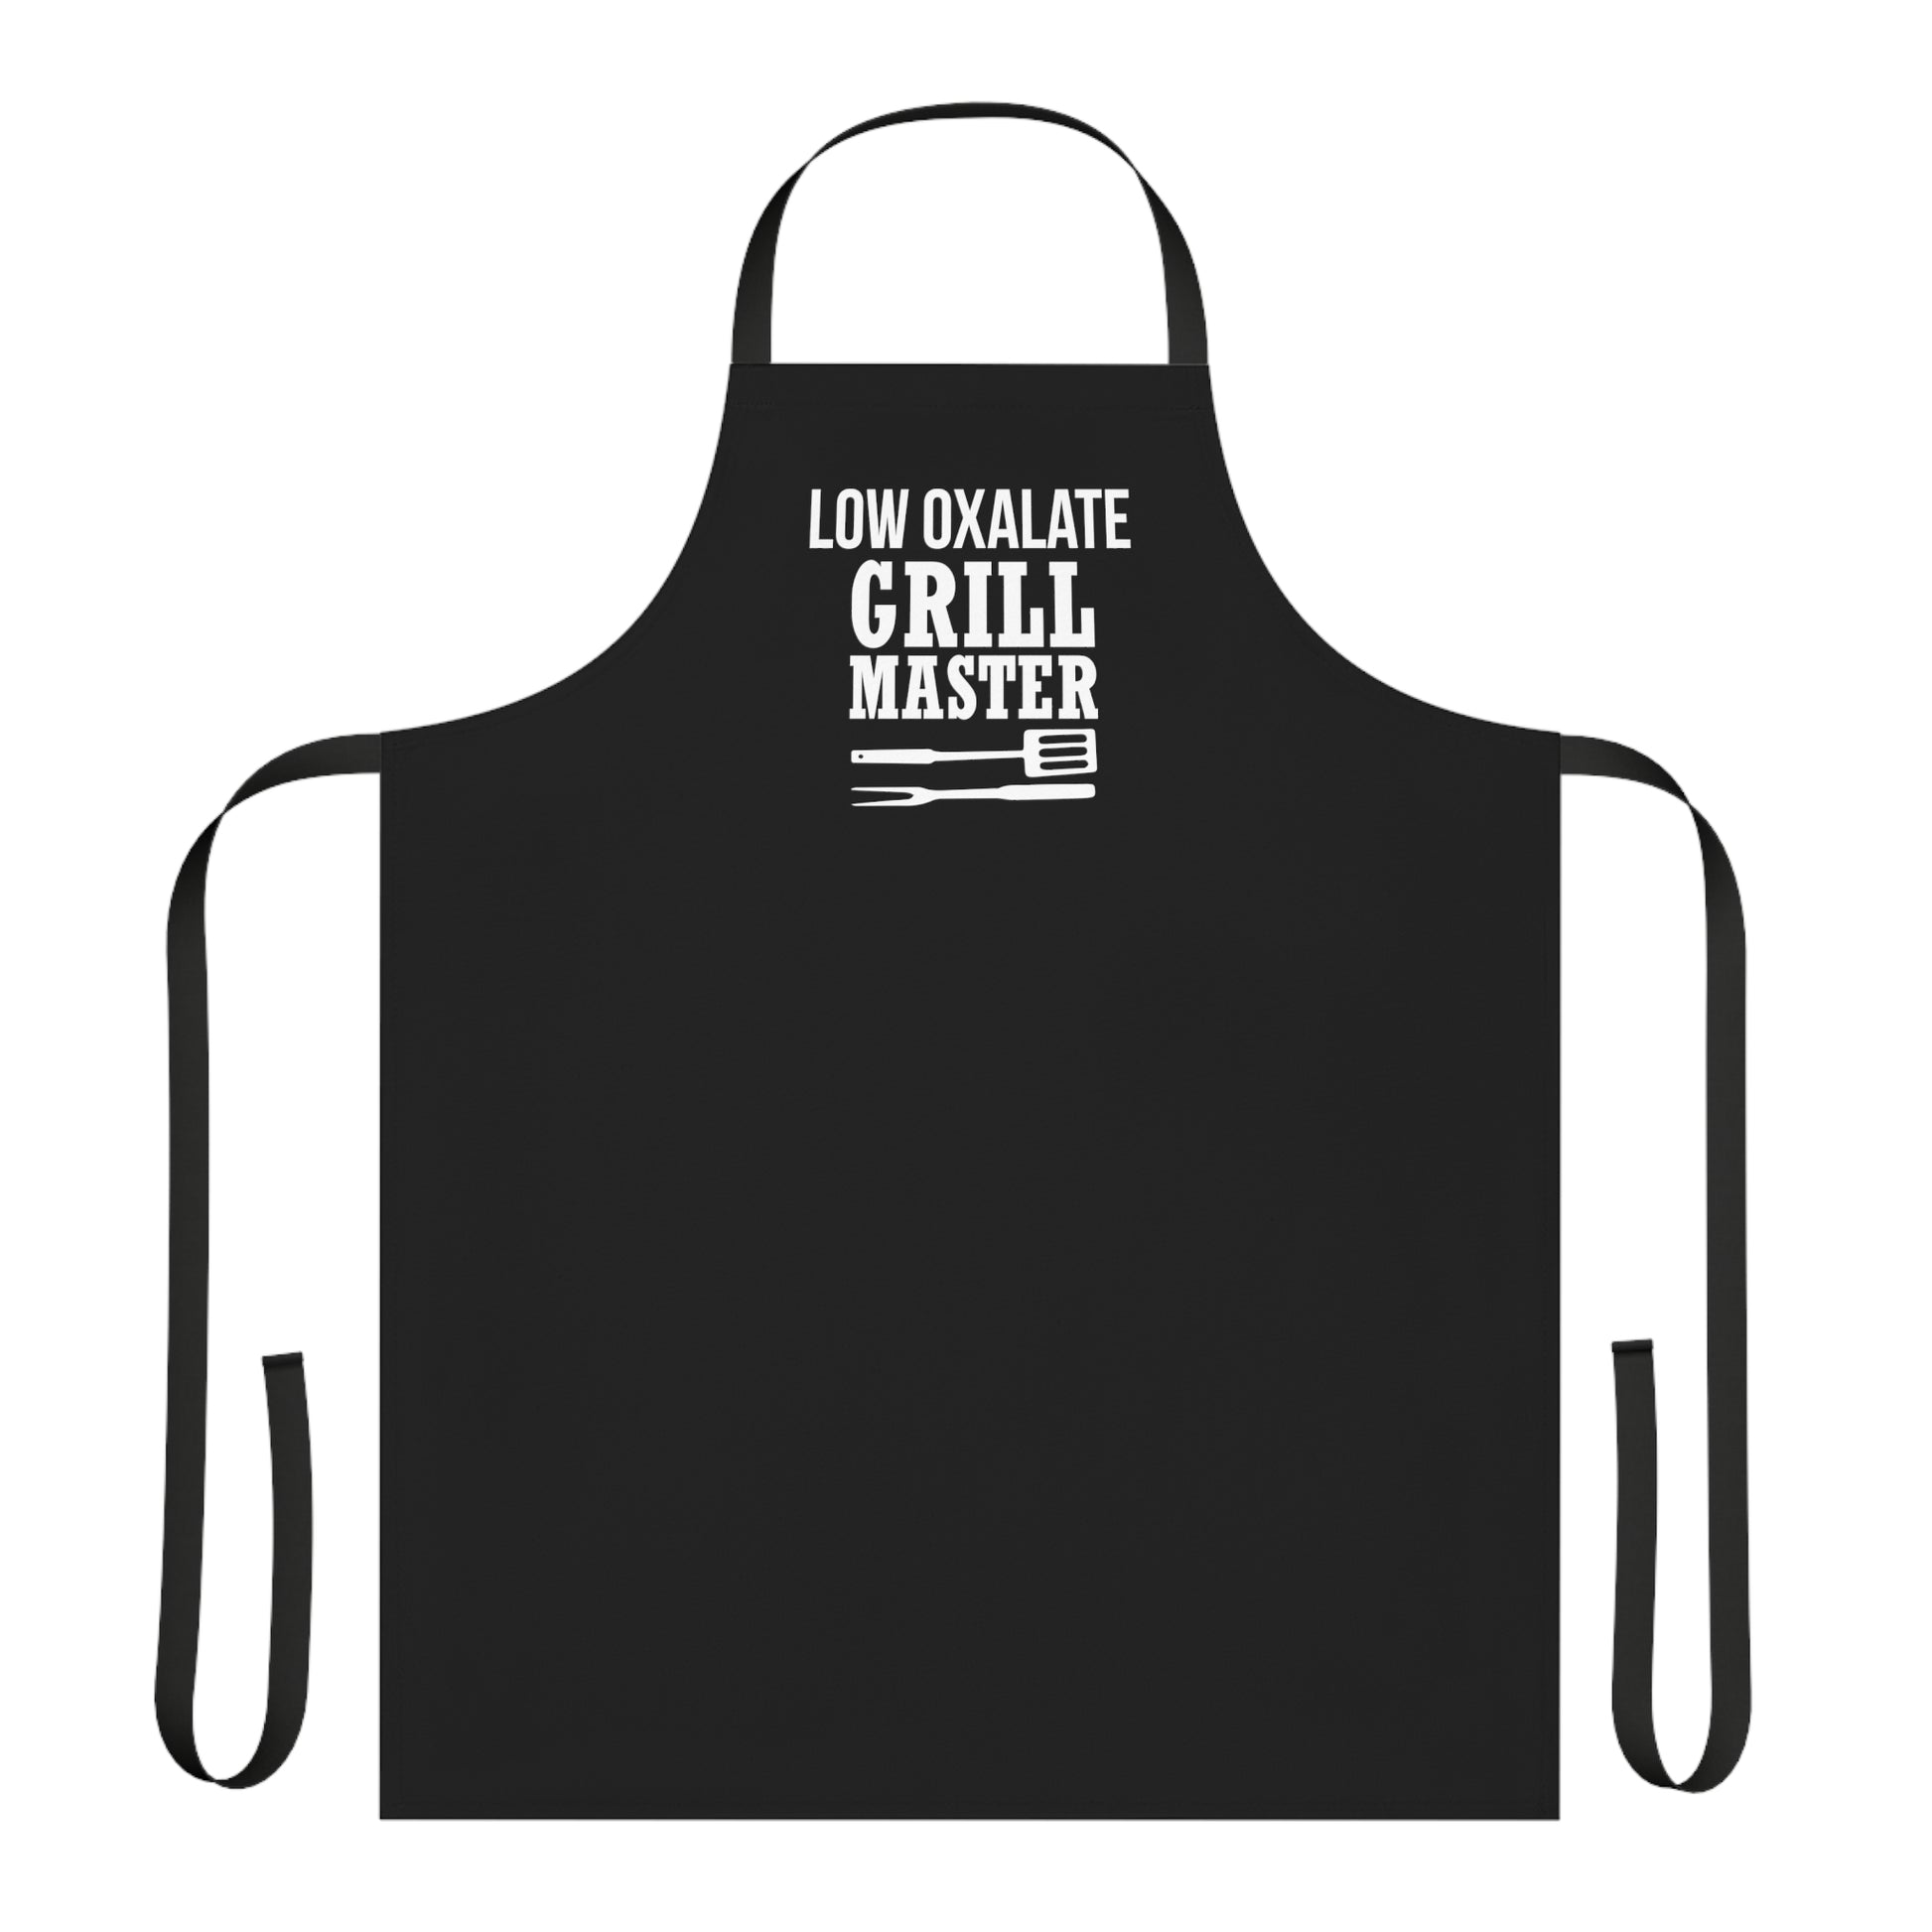 Low Oxalate Grill Master Apron for Super Dads and Moms